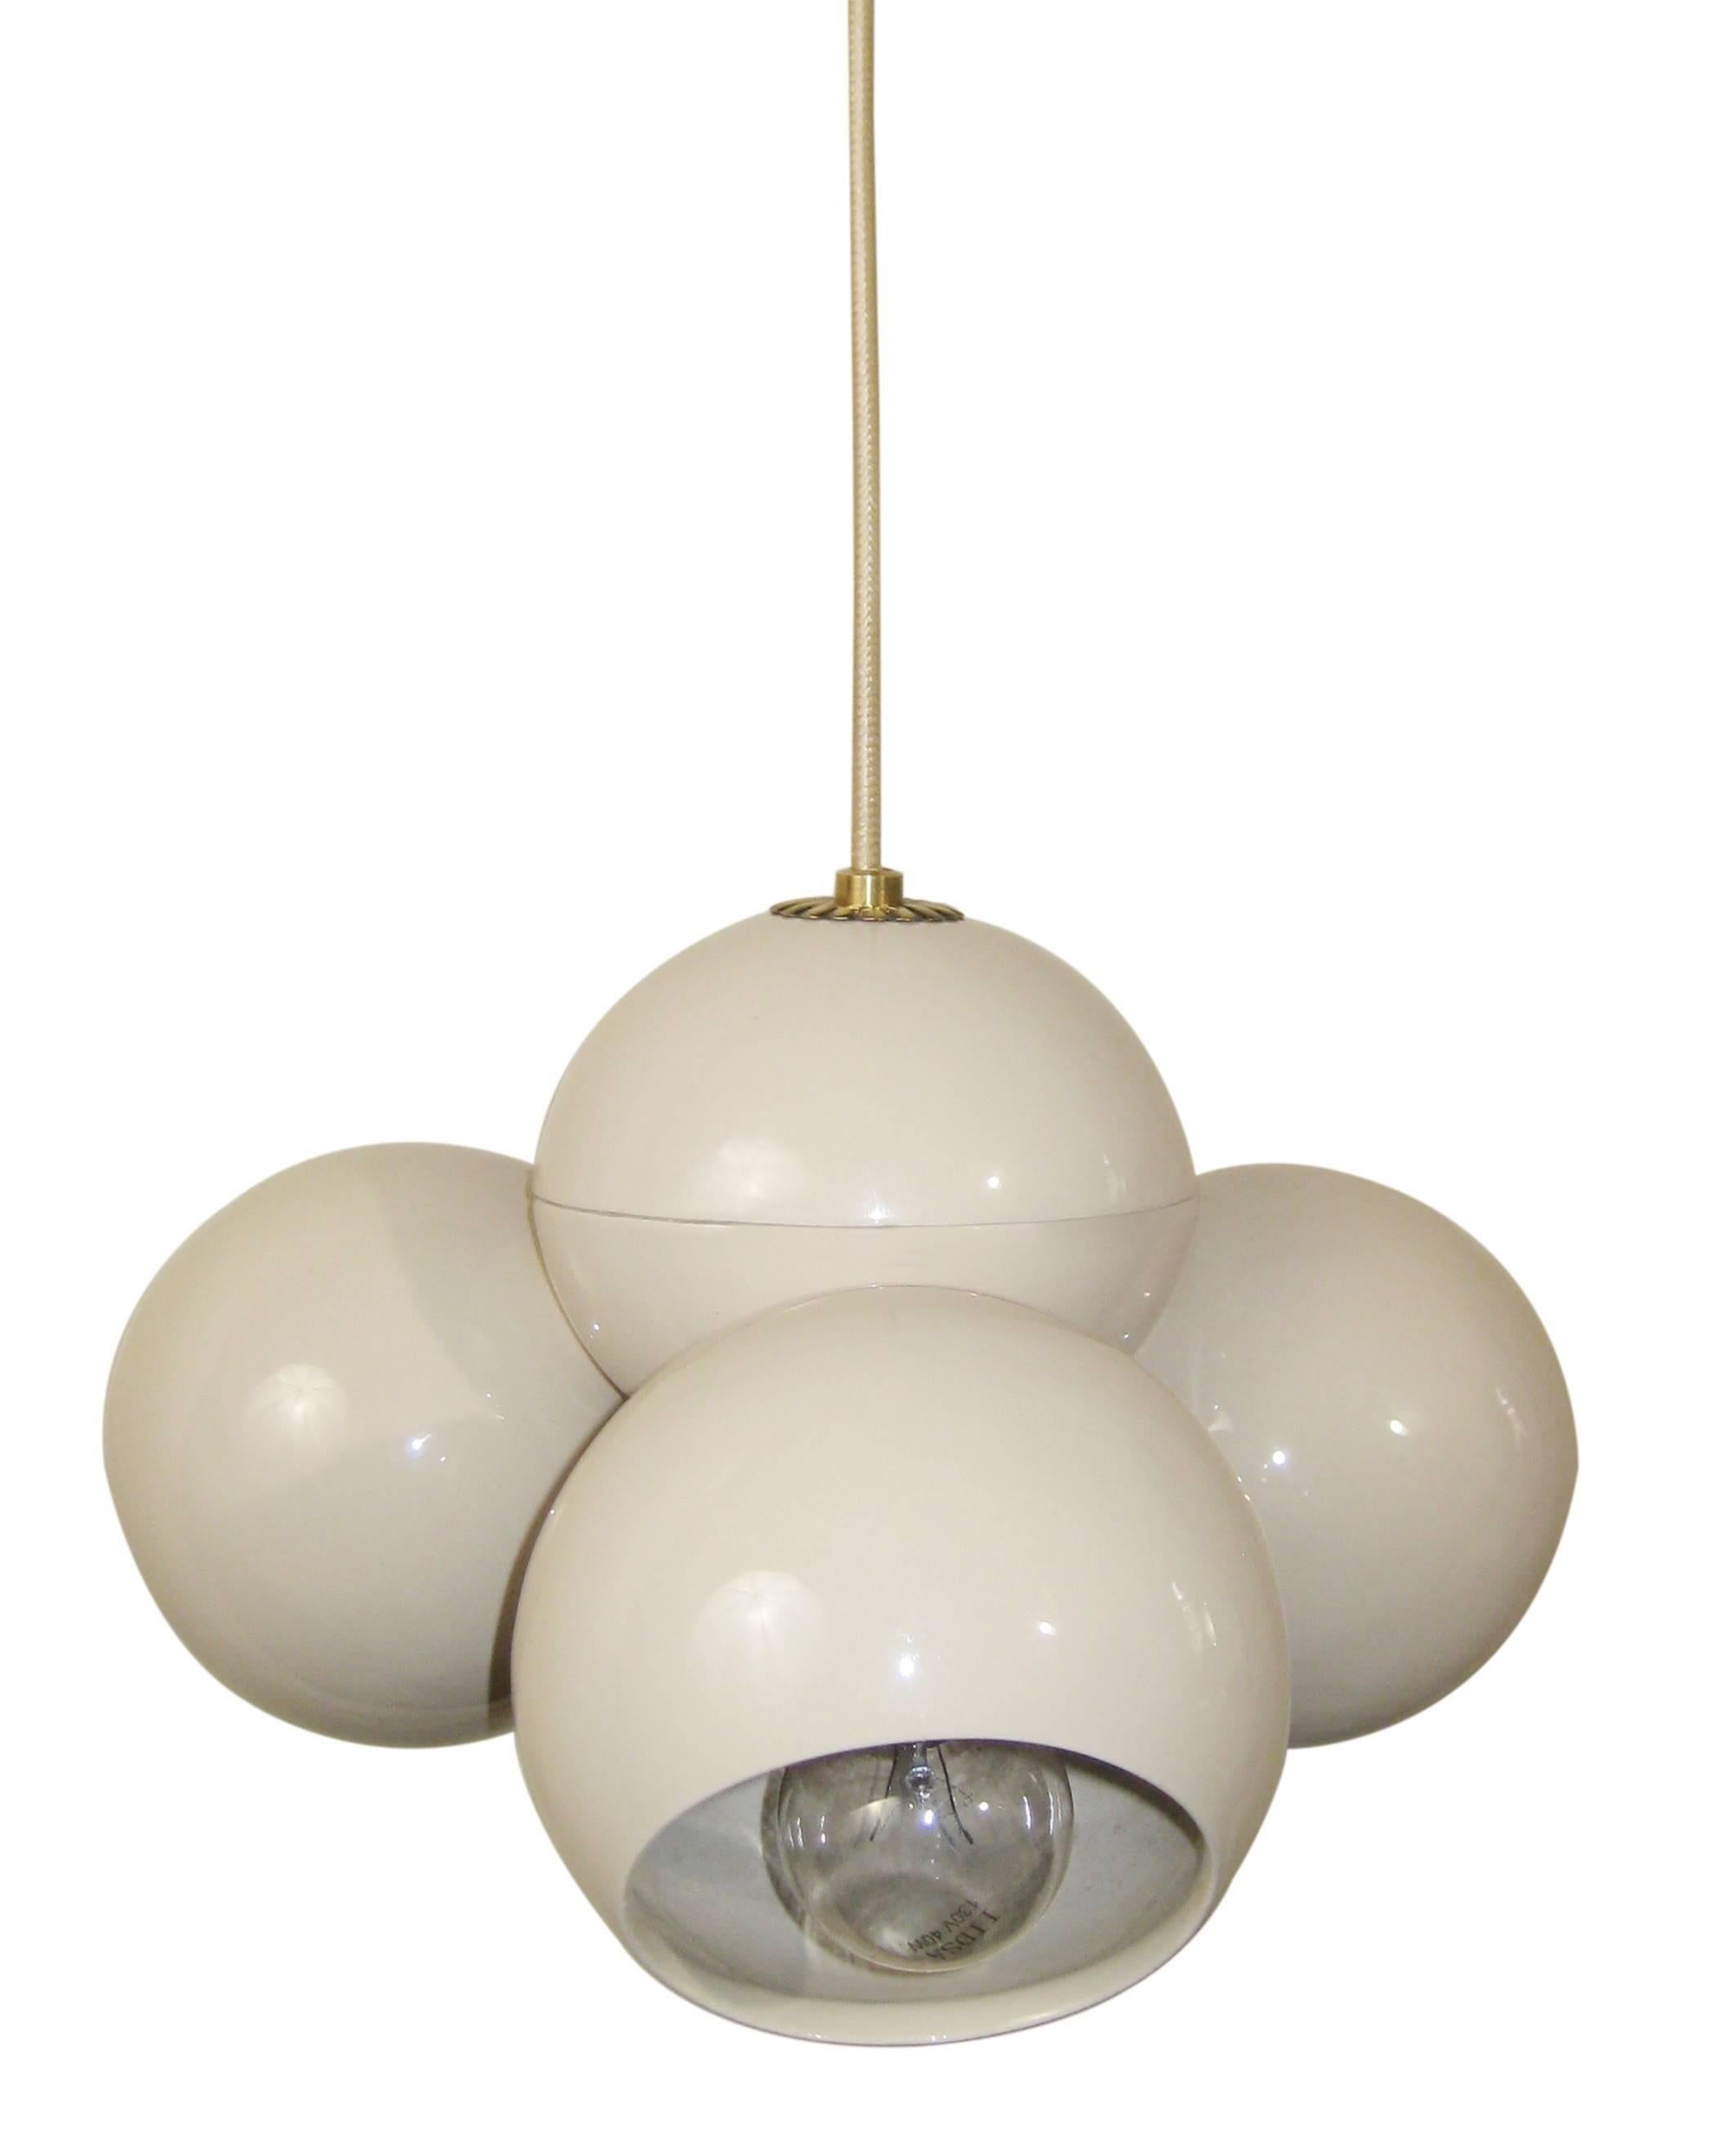 20th Century Ceiling Light in Ceramic and Brass, Italy, circa 1950 For Sale